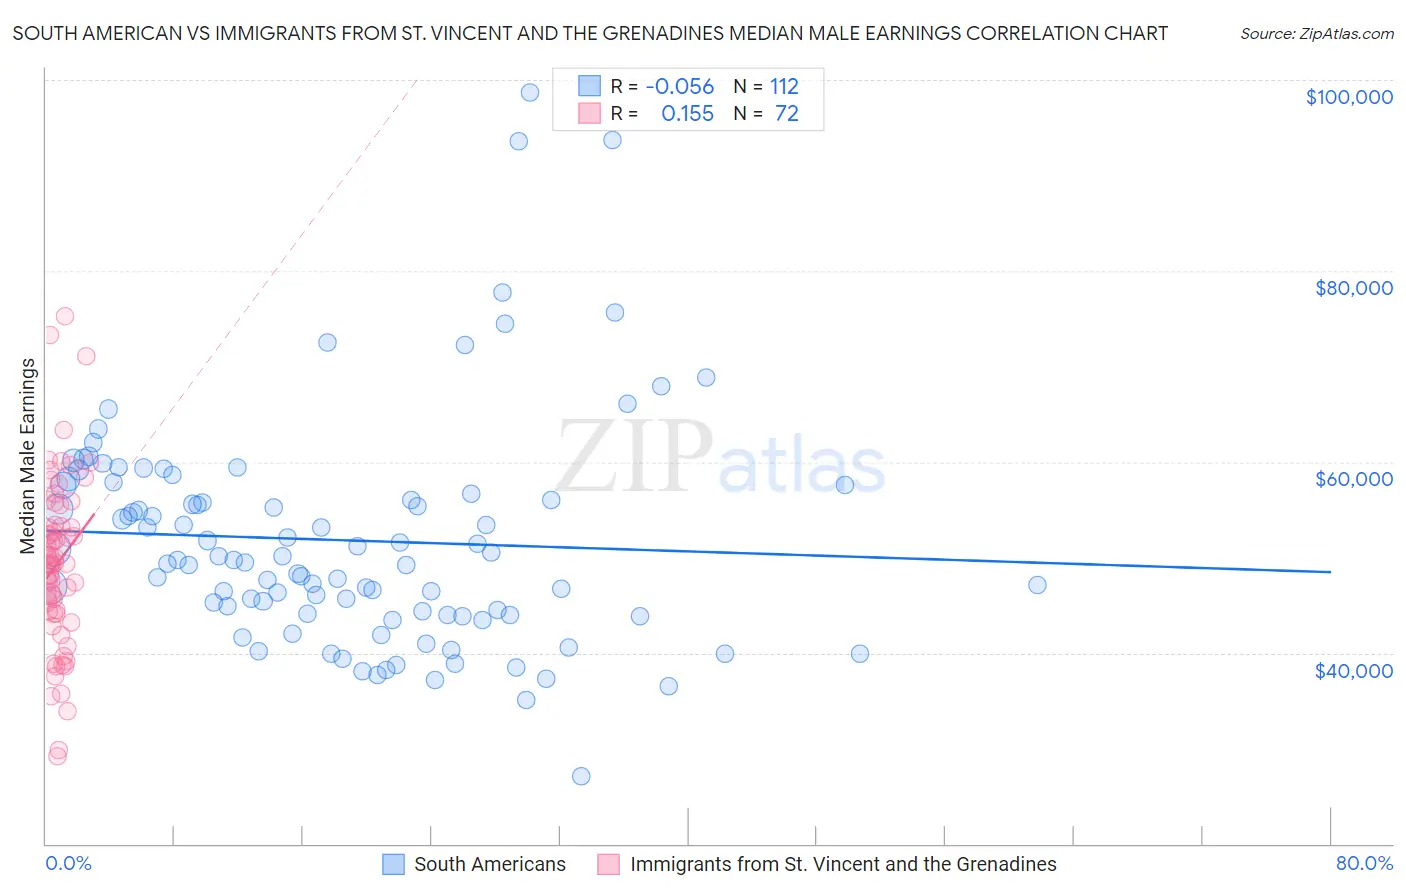 South American vs Immigrants from St. Vincent and the Grenadines Median Male Earnings